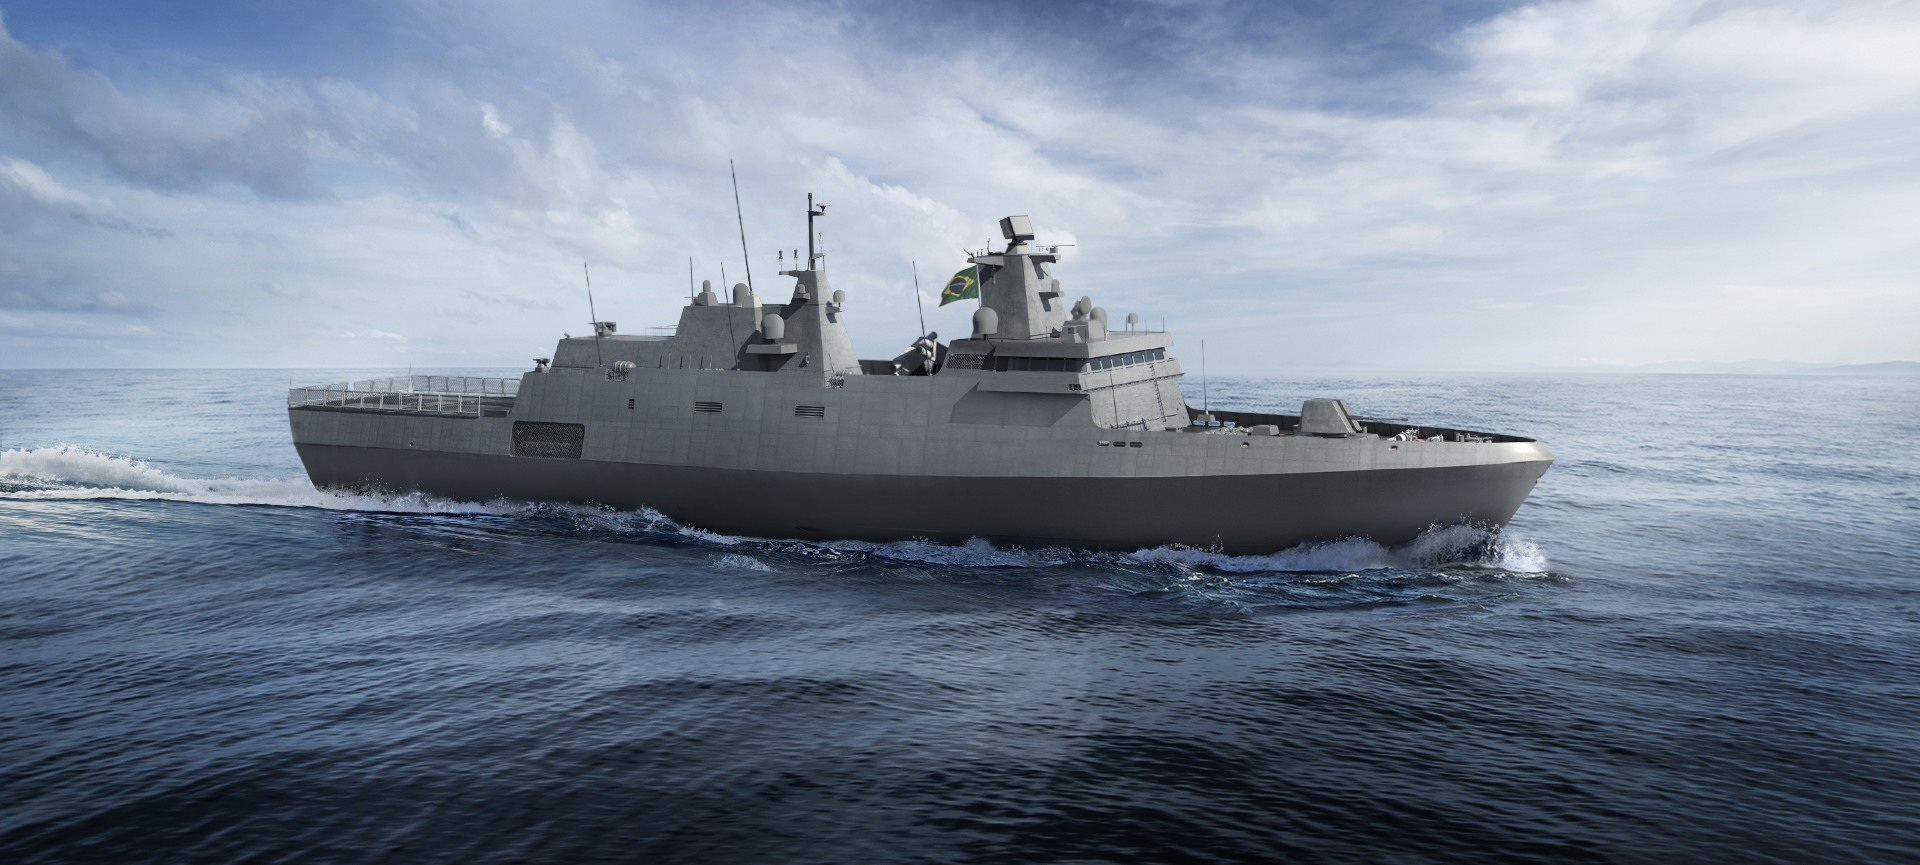 thyssenkrupp, Embraer and Atech sign the contract to build the Tamandaré Class Ships of the Brazilian Navy